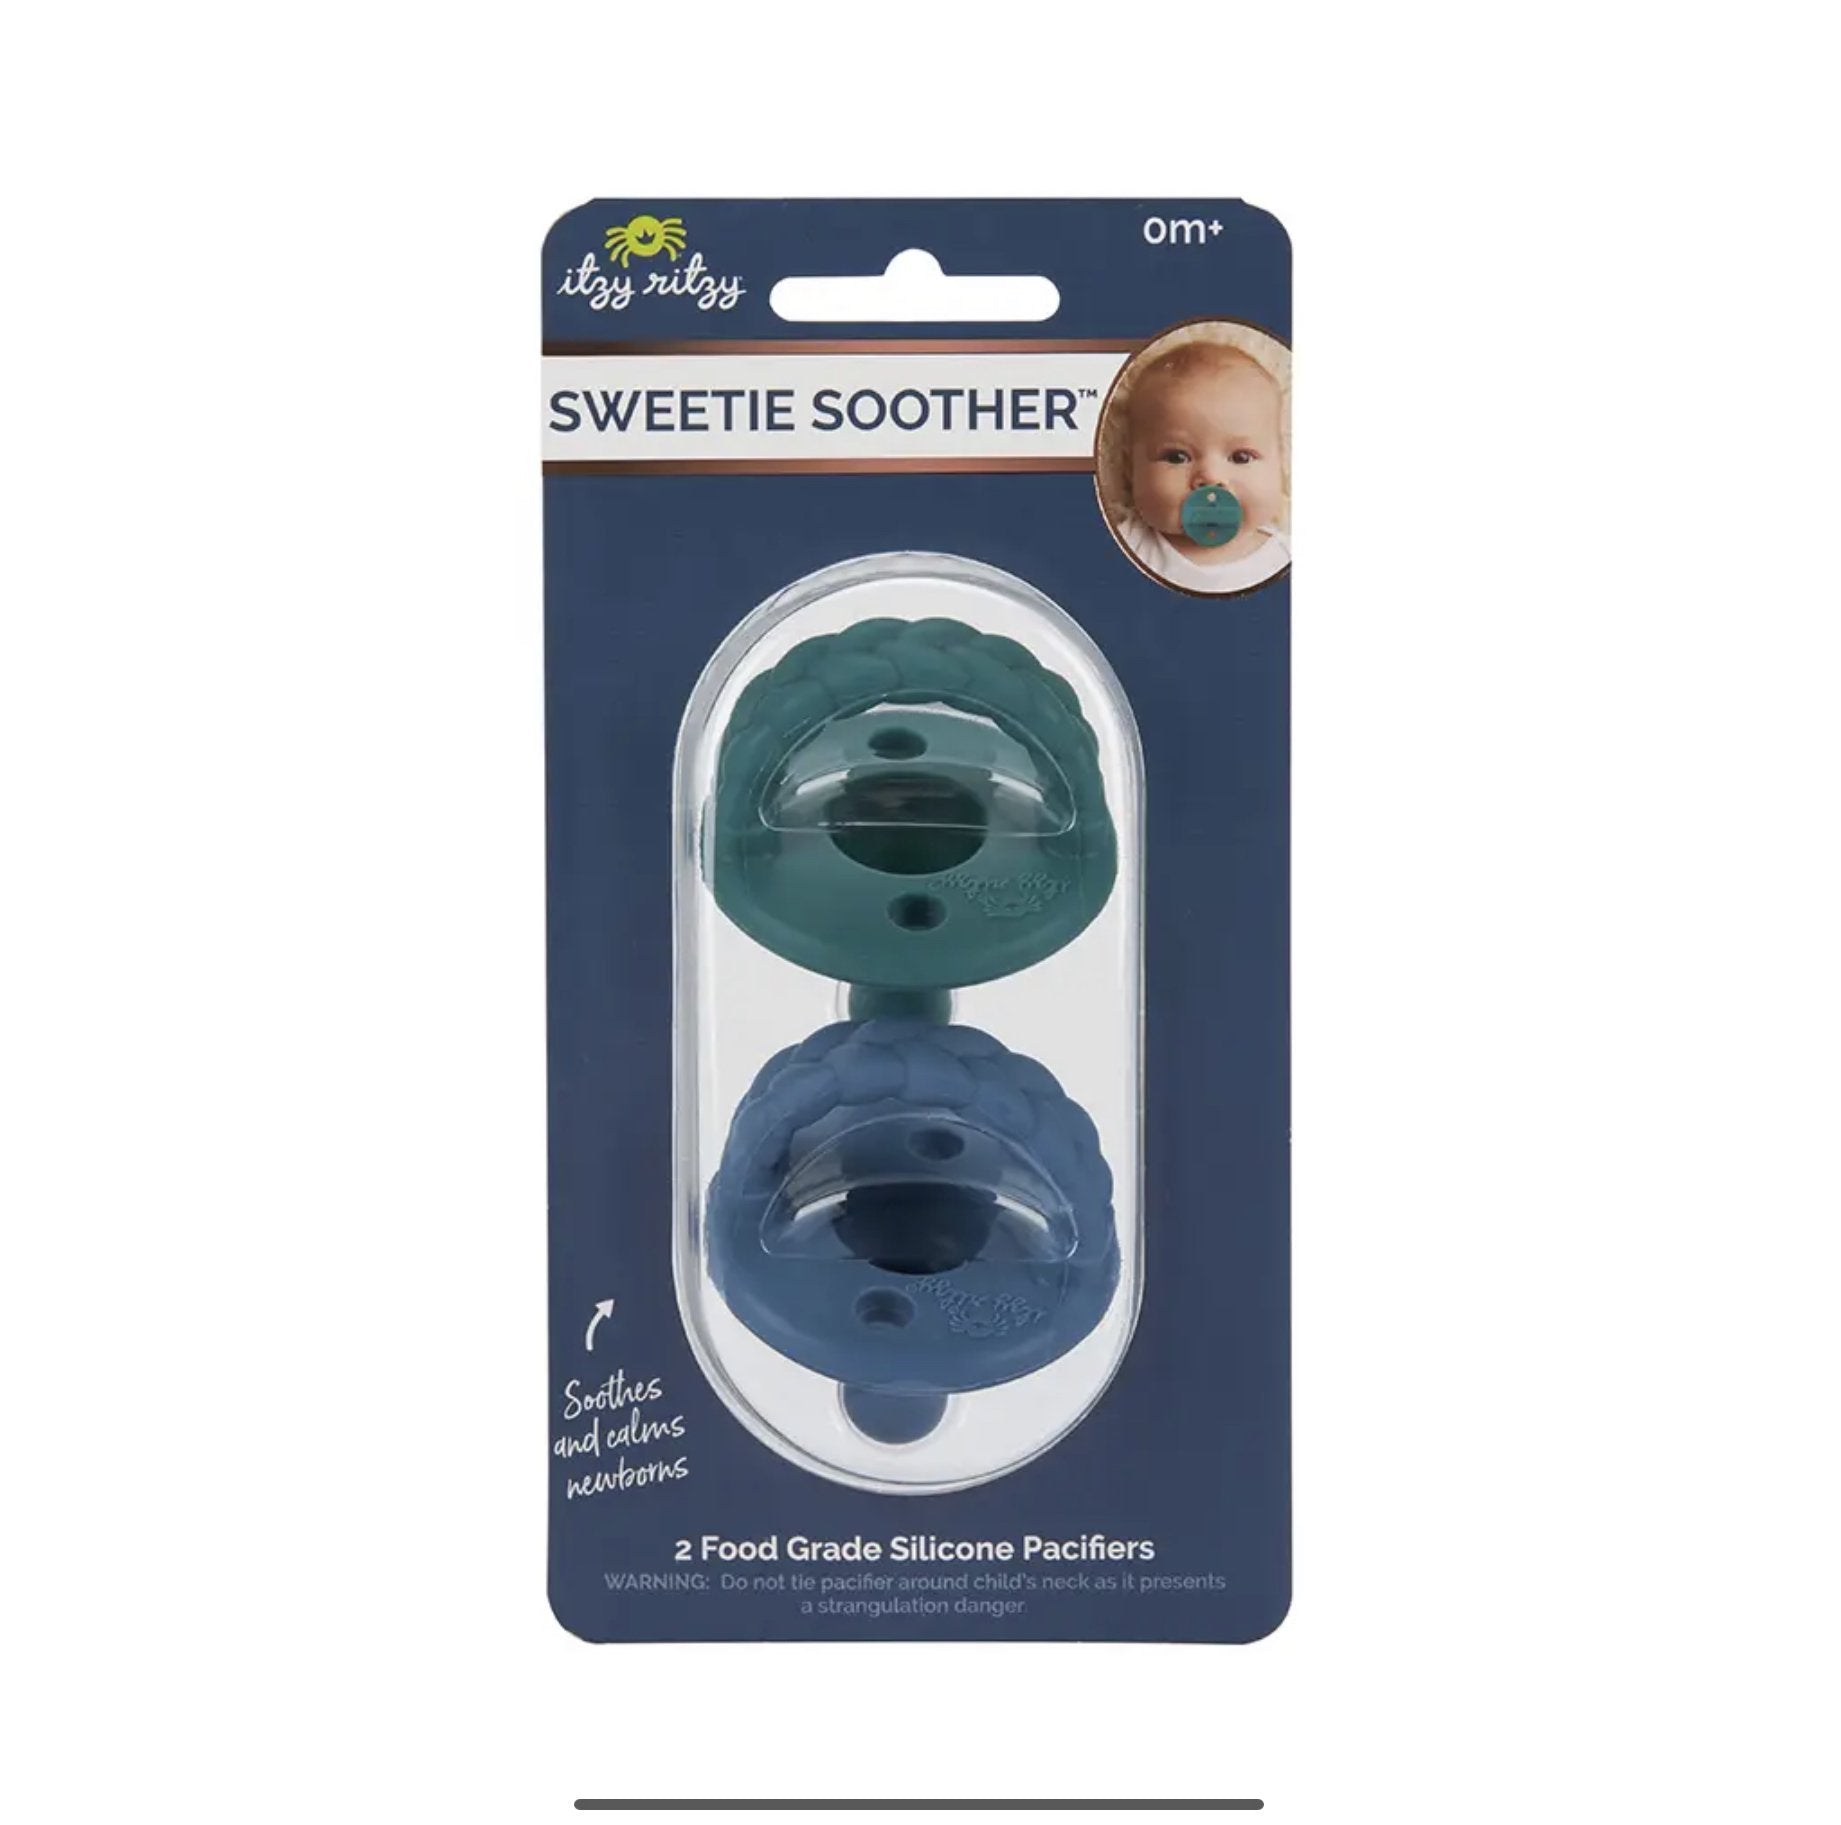 SWEETIE SOOTHER - PACIFIER 2-PACK Baby in Styles